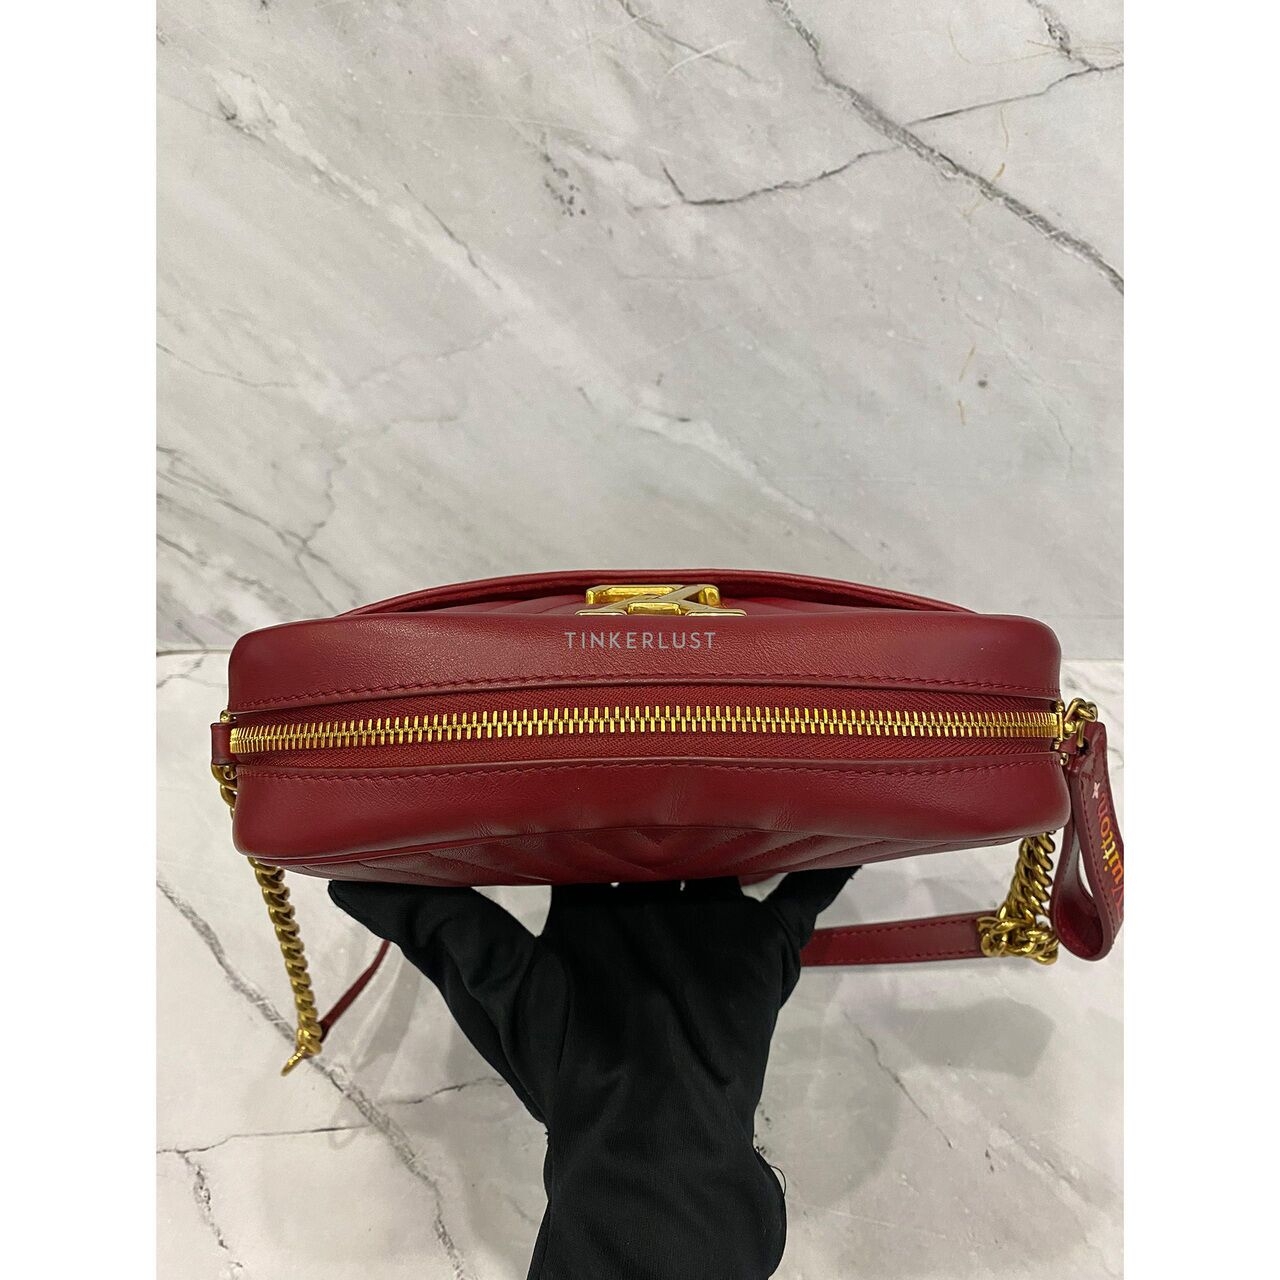 Louis Vuitton Camera Bag New Wave Cherry Berry GHW 2019 Sling Bag